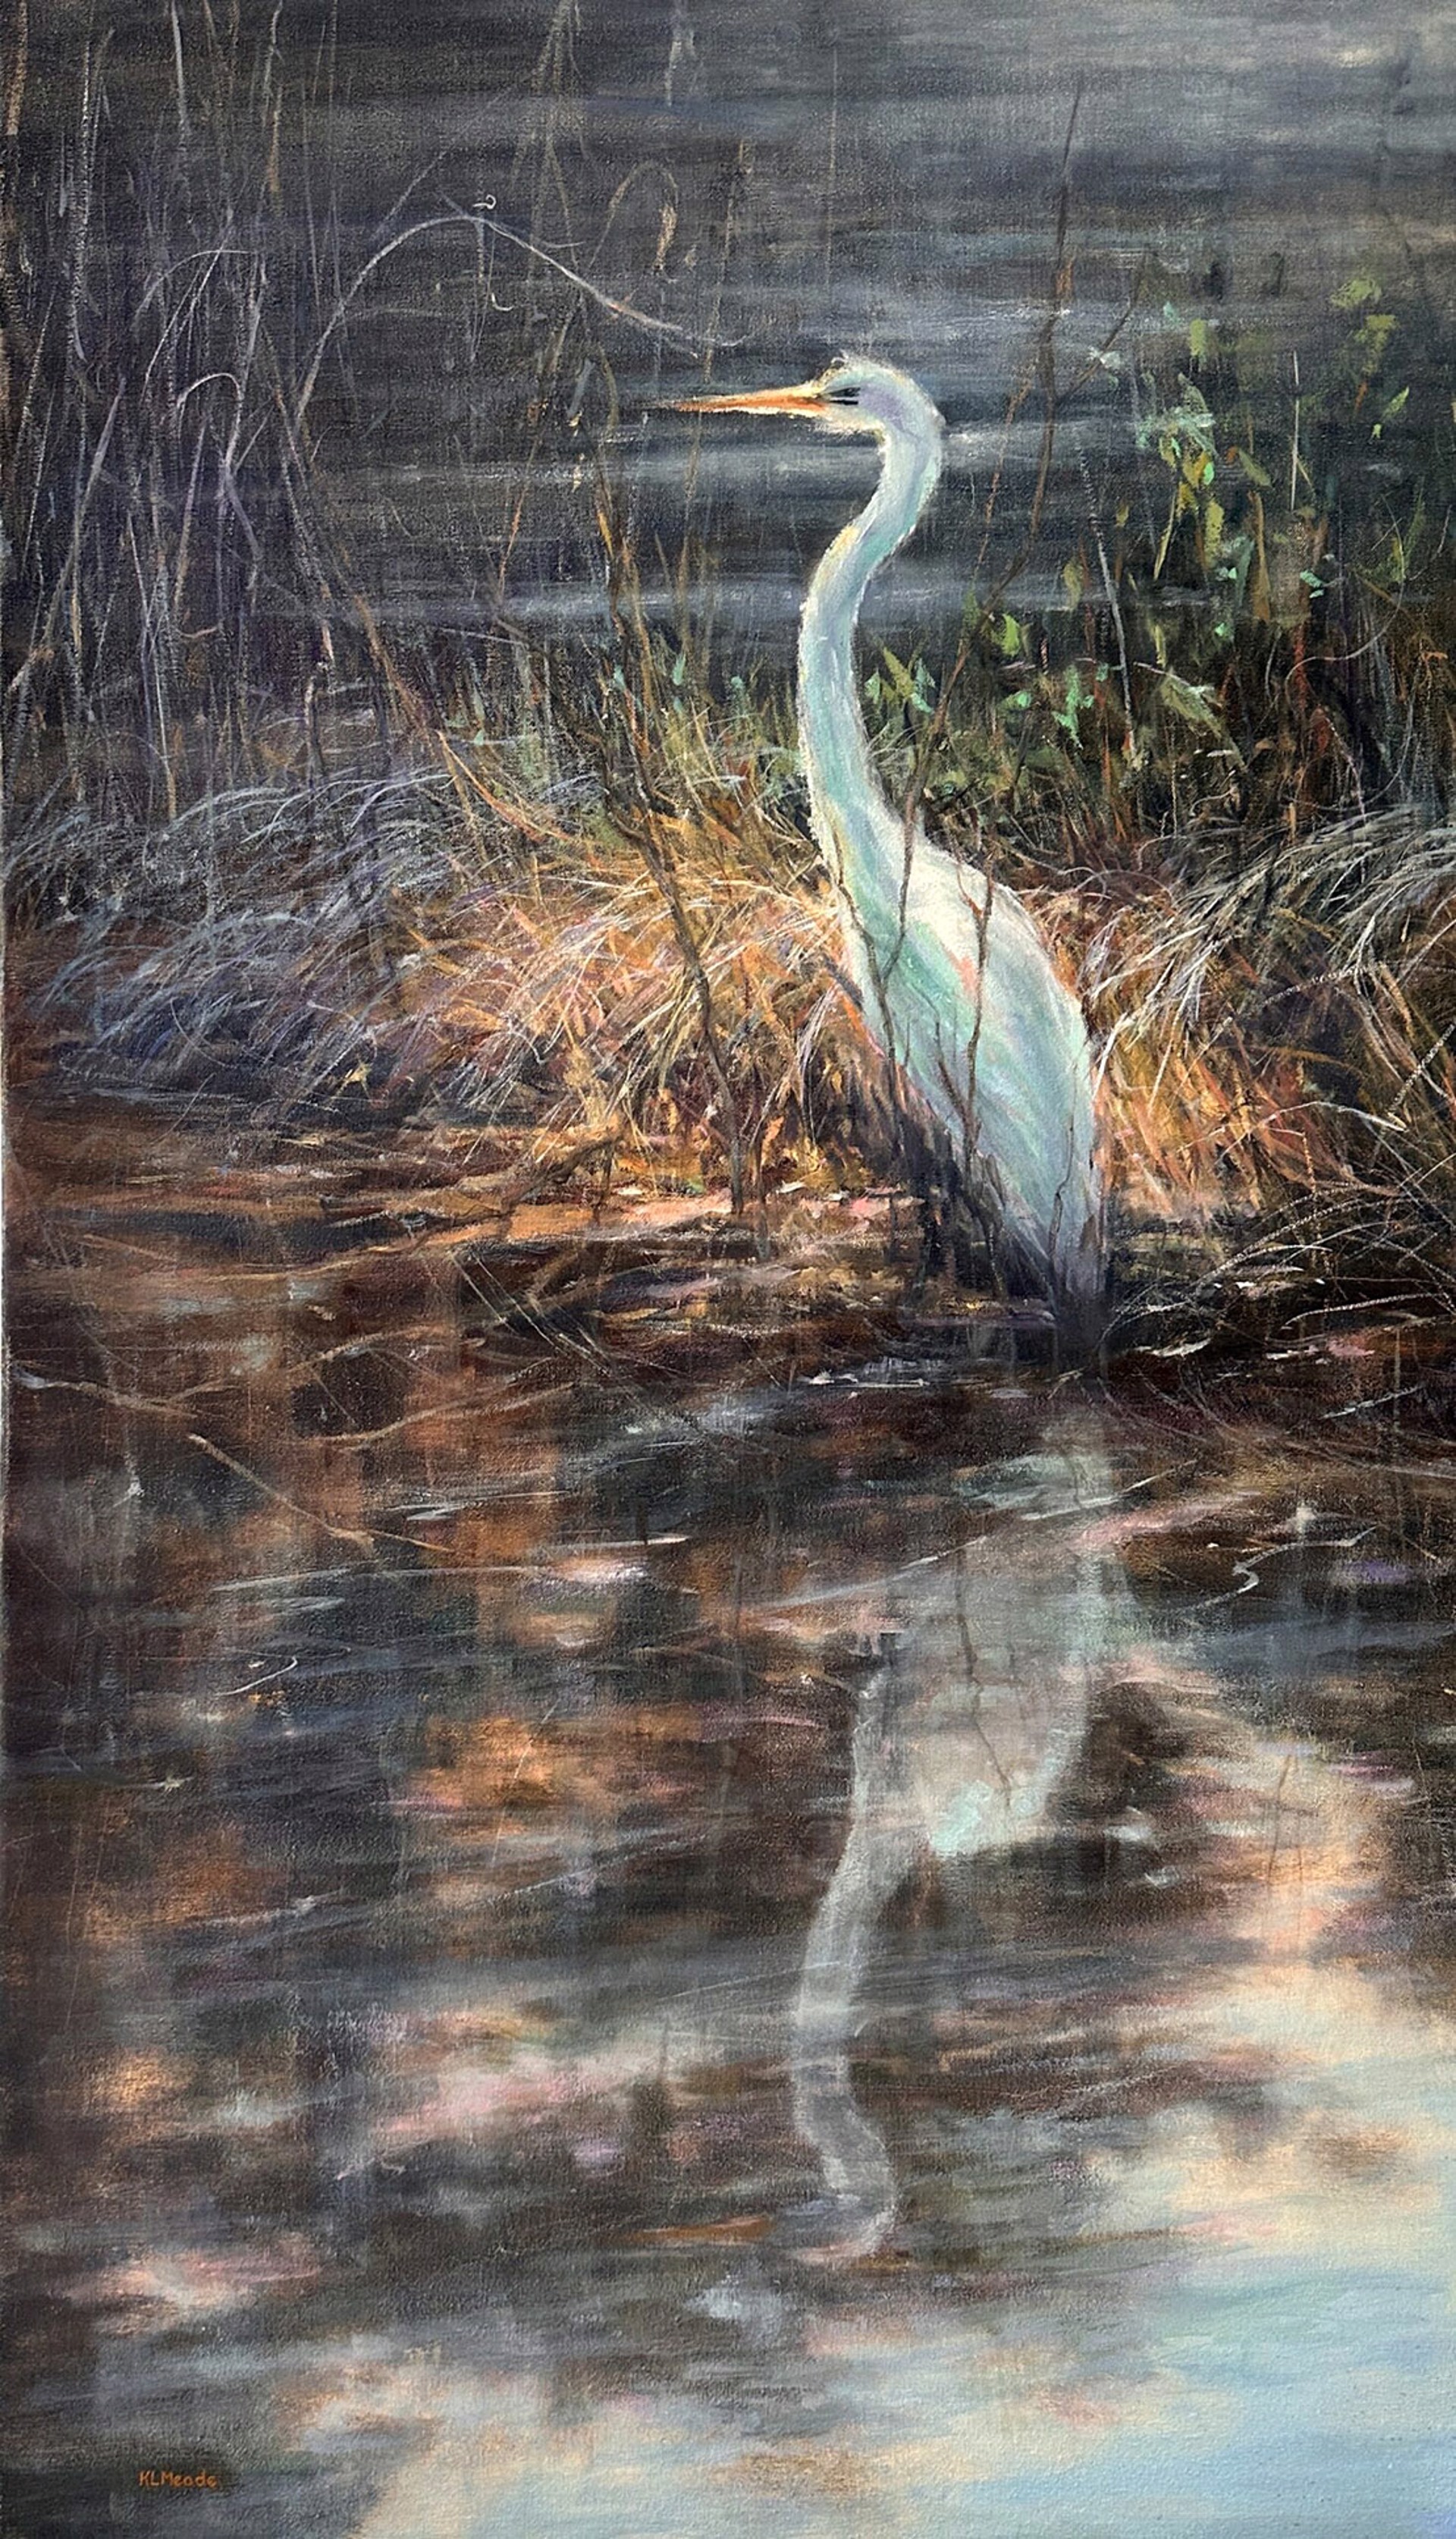 Katherine LaPlace Meade "White Heron" by Oil Painters of America